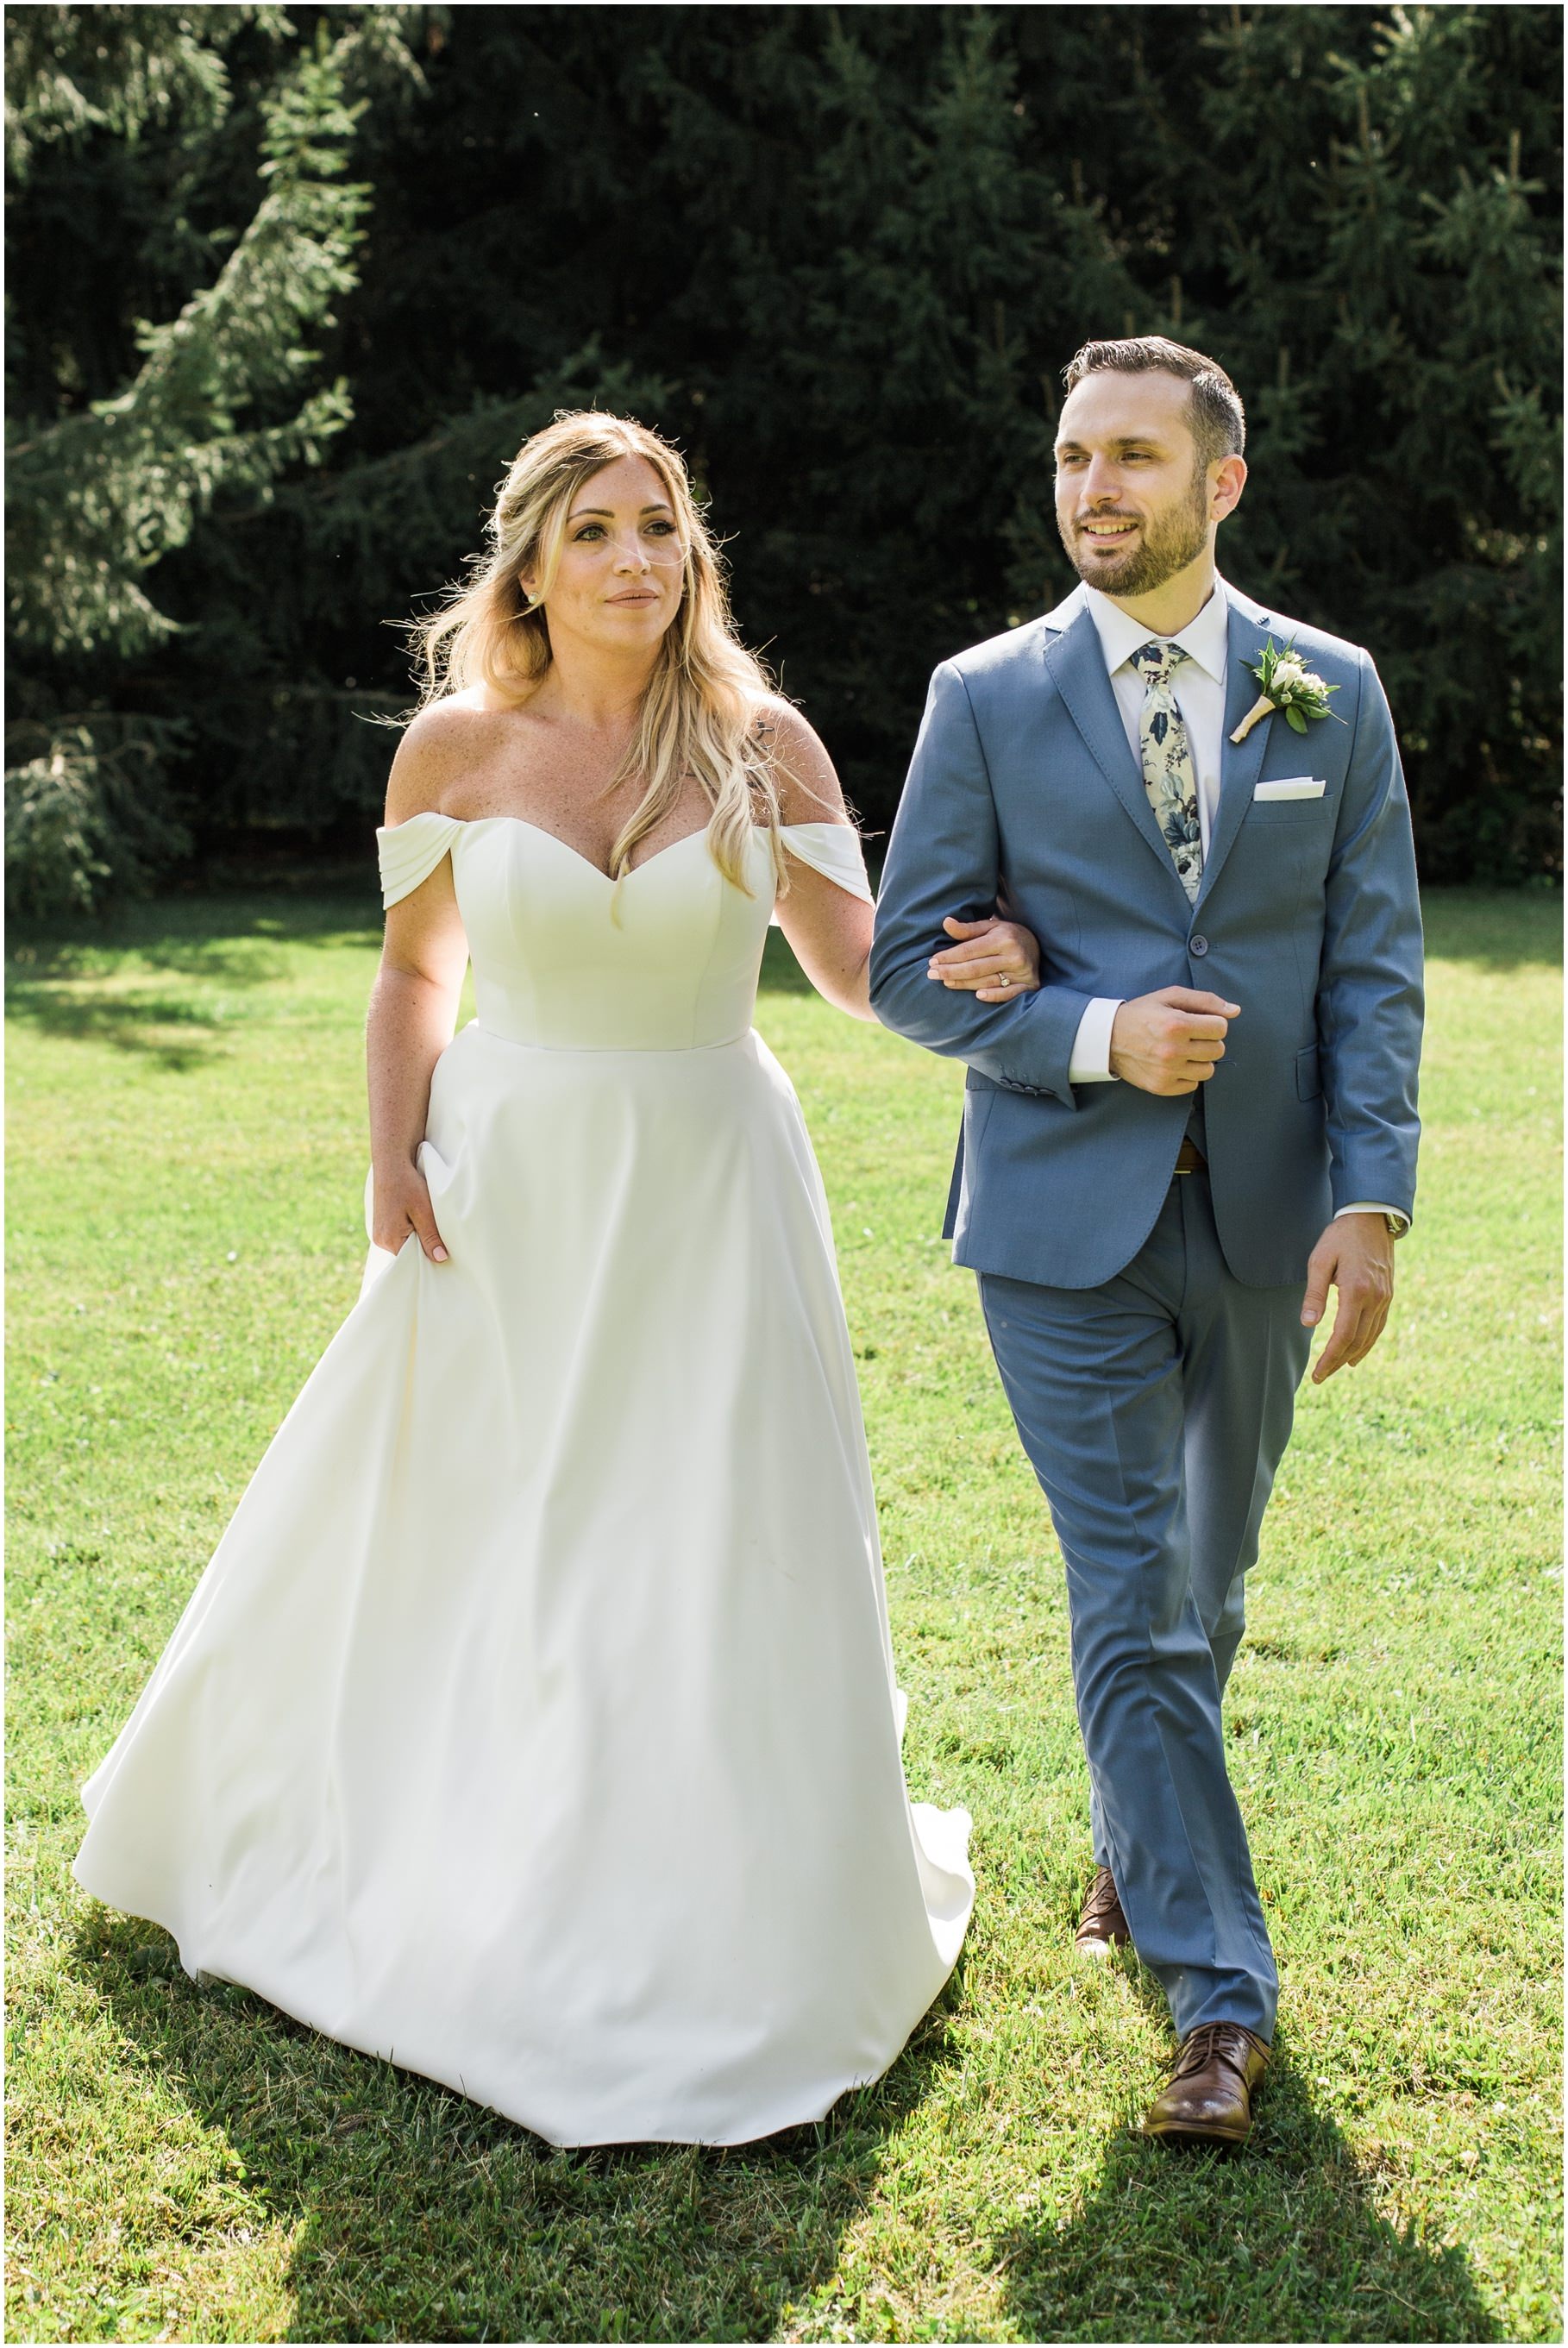 adam lowe photography, wedding, bride, groom, Wendy’s Bridal,Sofyano Suits,Show Me Your Mumu,Made From Scratch, Lasting Impressions, outdoor wedding, style, stylish, columbus, ohio, midwest, 